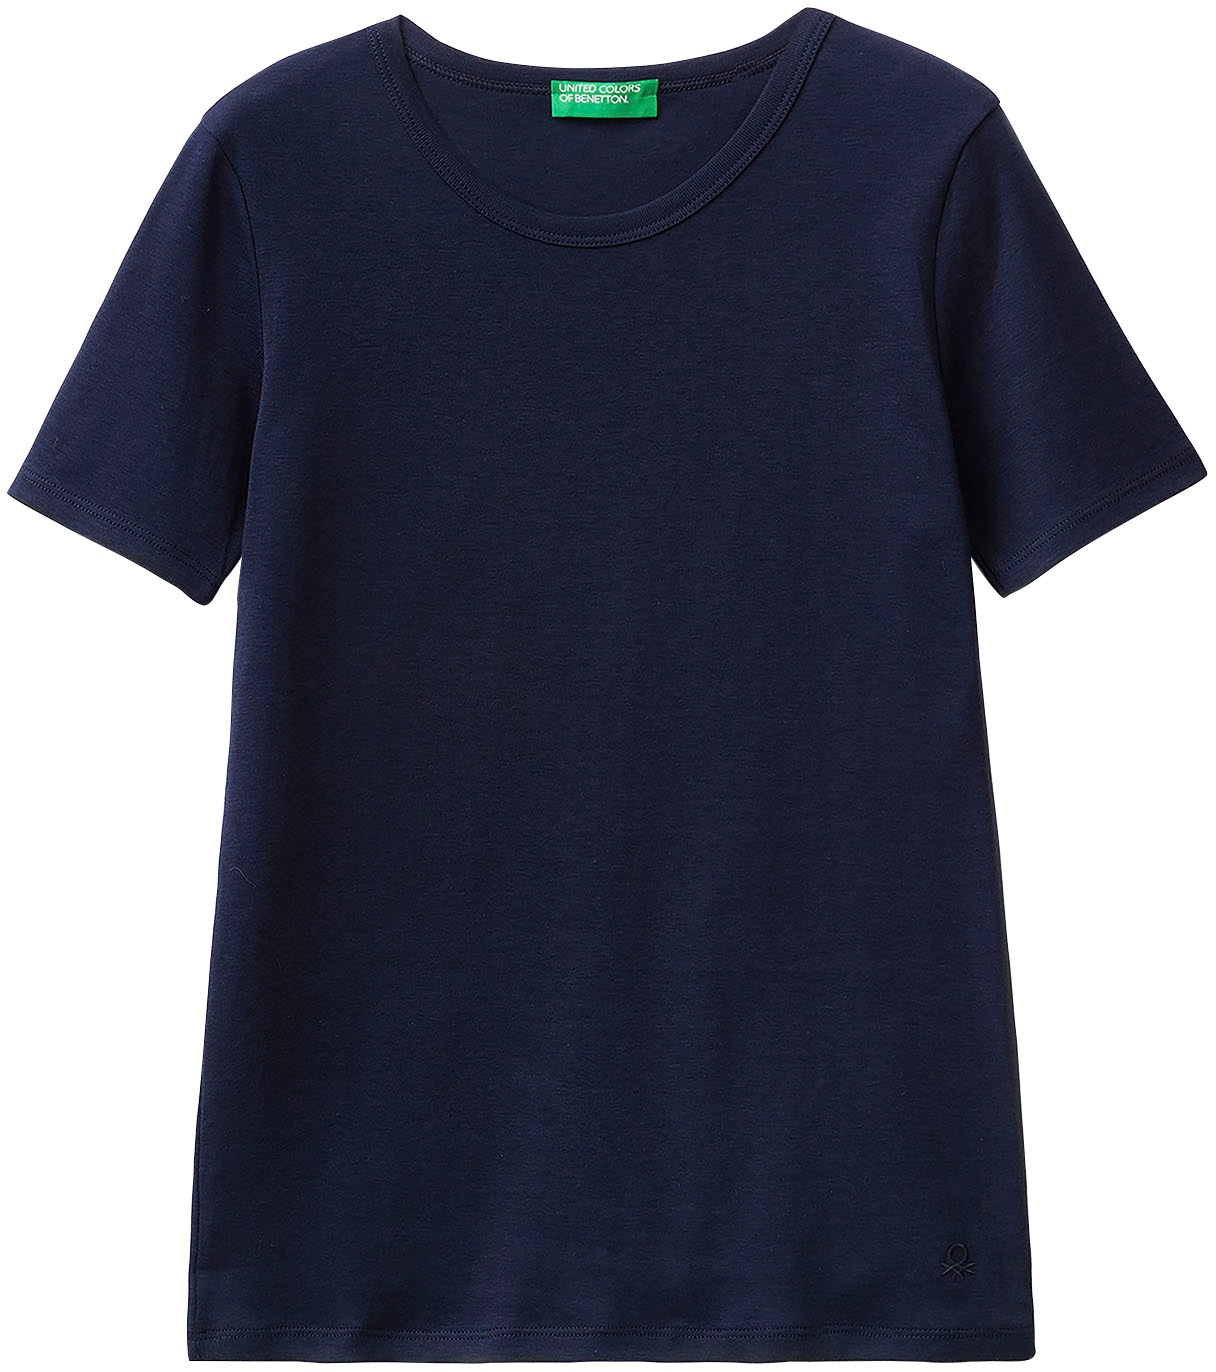 United Rippenqualität in bei ♕ T-Shirt, Benetton Colors feiner of